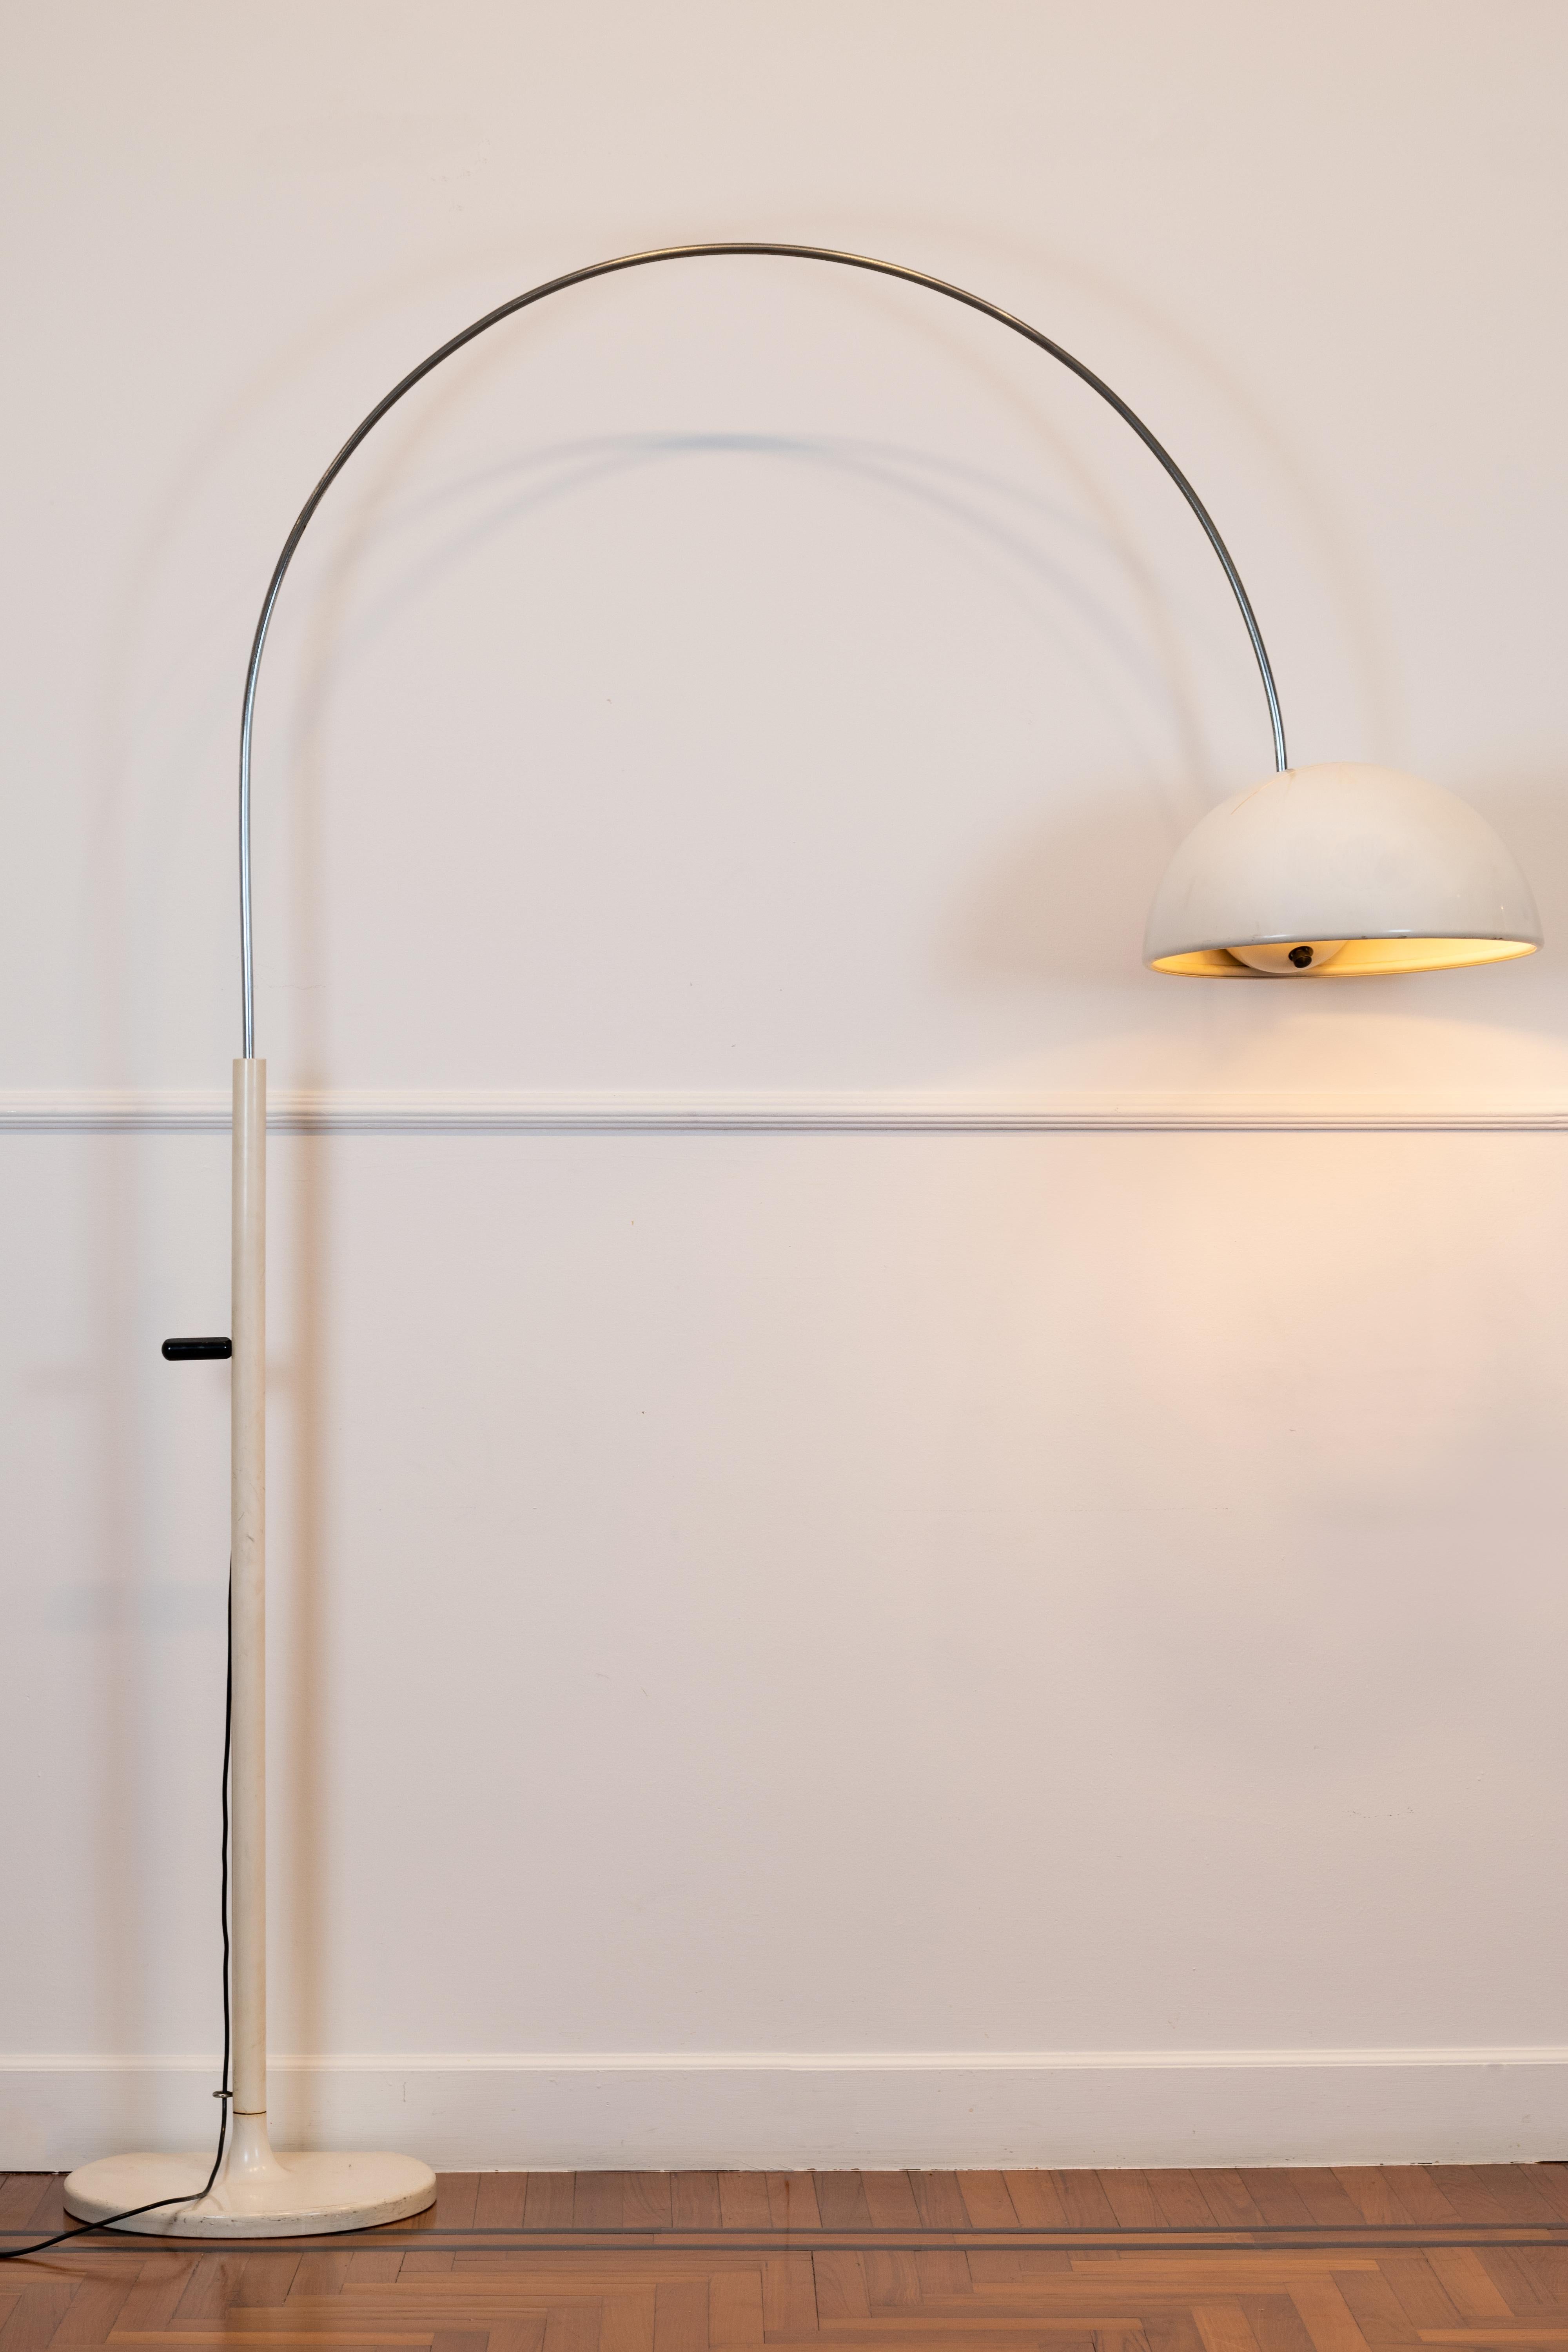 Mid-20th Century Joe Colombo Coupè Floor Lamp in White Lacquered Metal by Oluce 1967 Italy